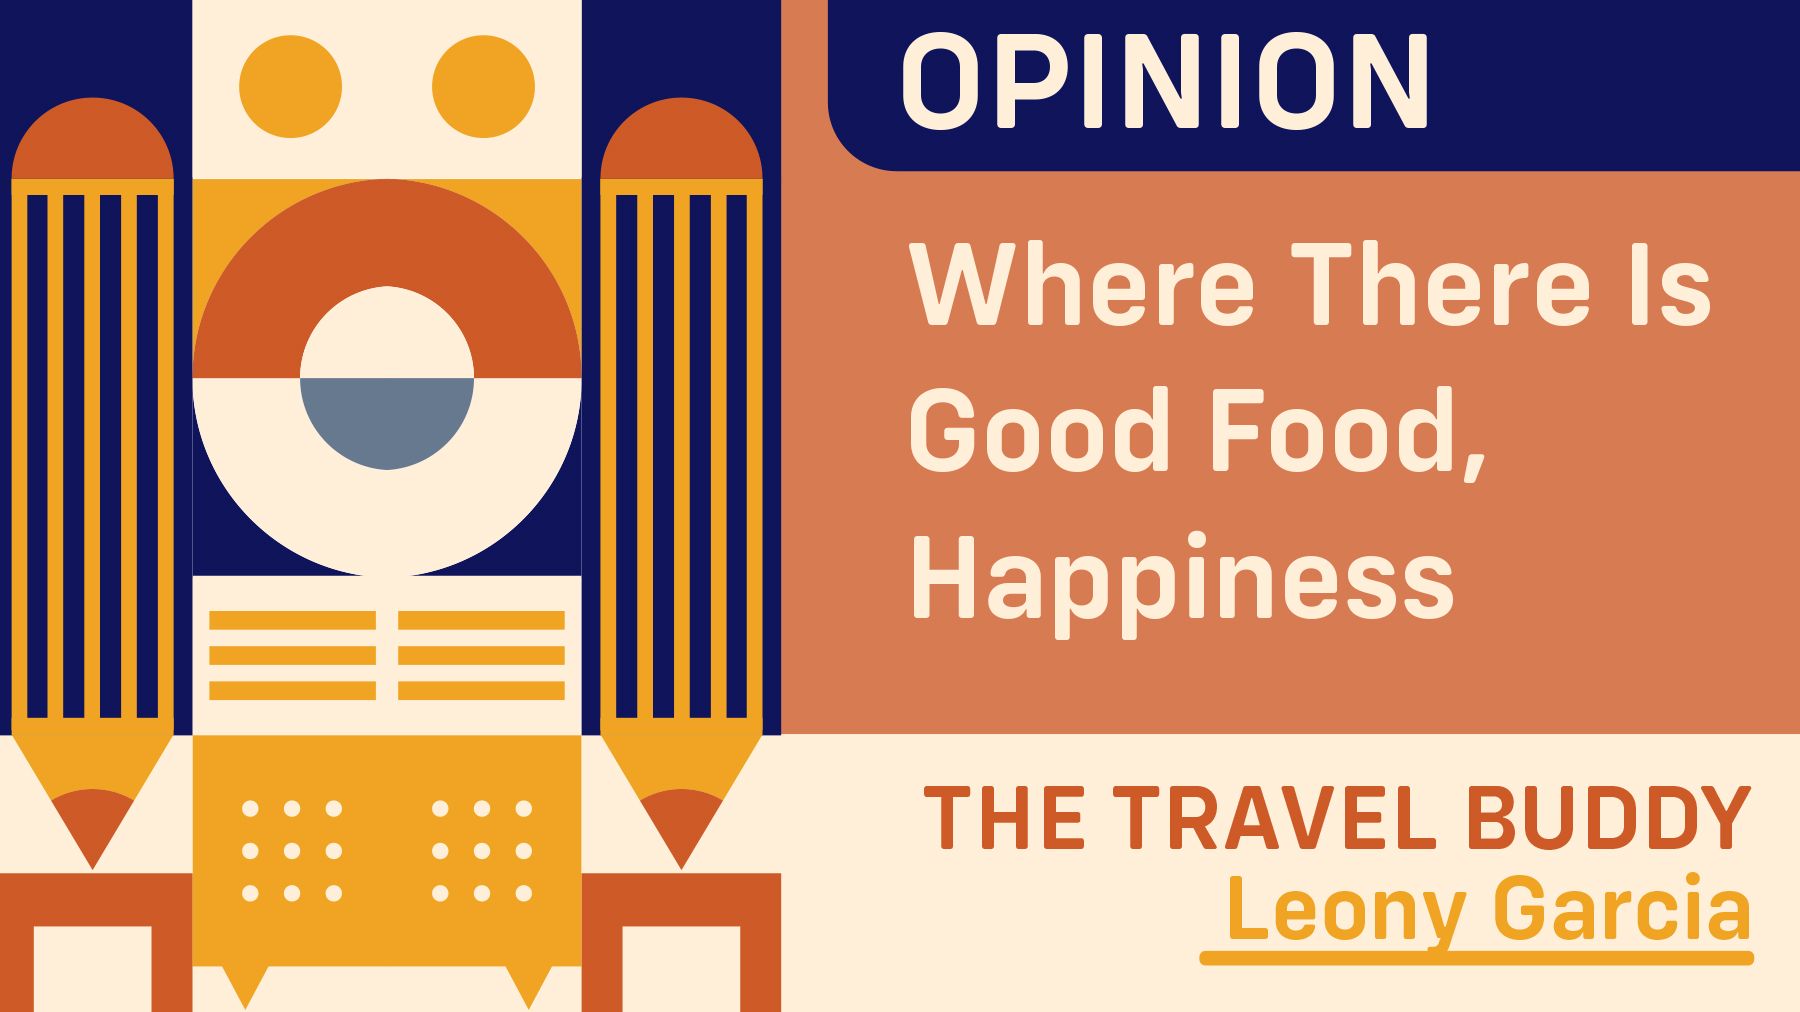 Where There Is Good Food, Happiness